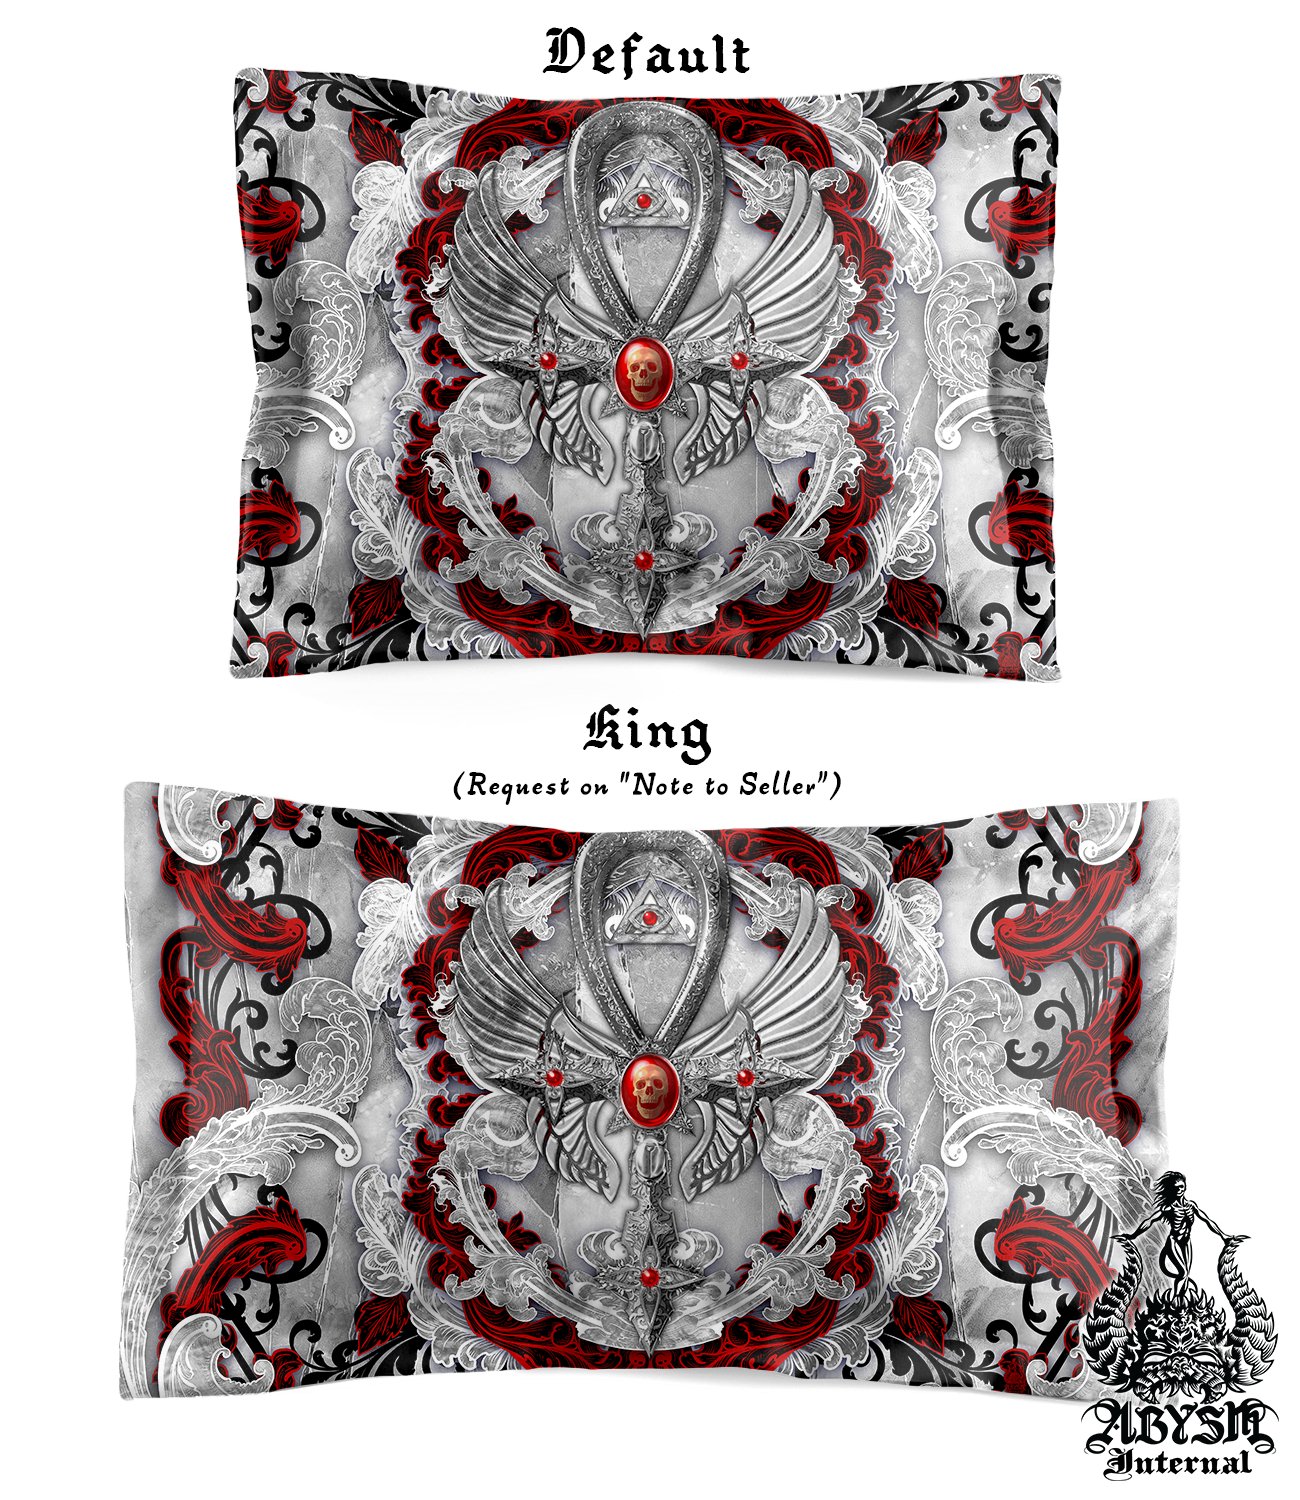 White Goth Bedding Set, Gothic Comforter or Duvet, Goth Bed Cover, Bedroom Decor, King, Queen & Twin Size - Bloody Ankh, Red, Purple, Black, 4 Colors - Abysm Internal